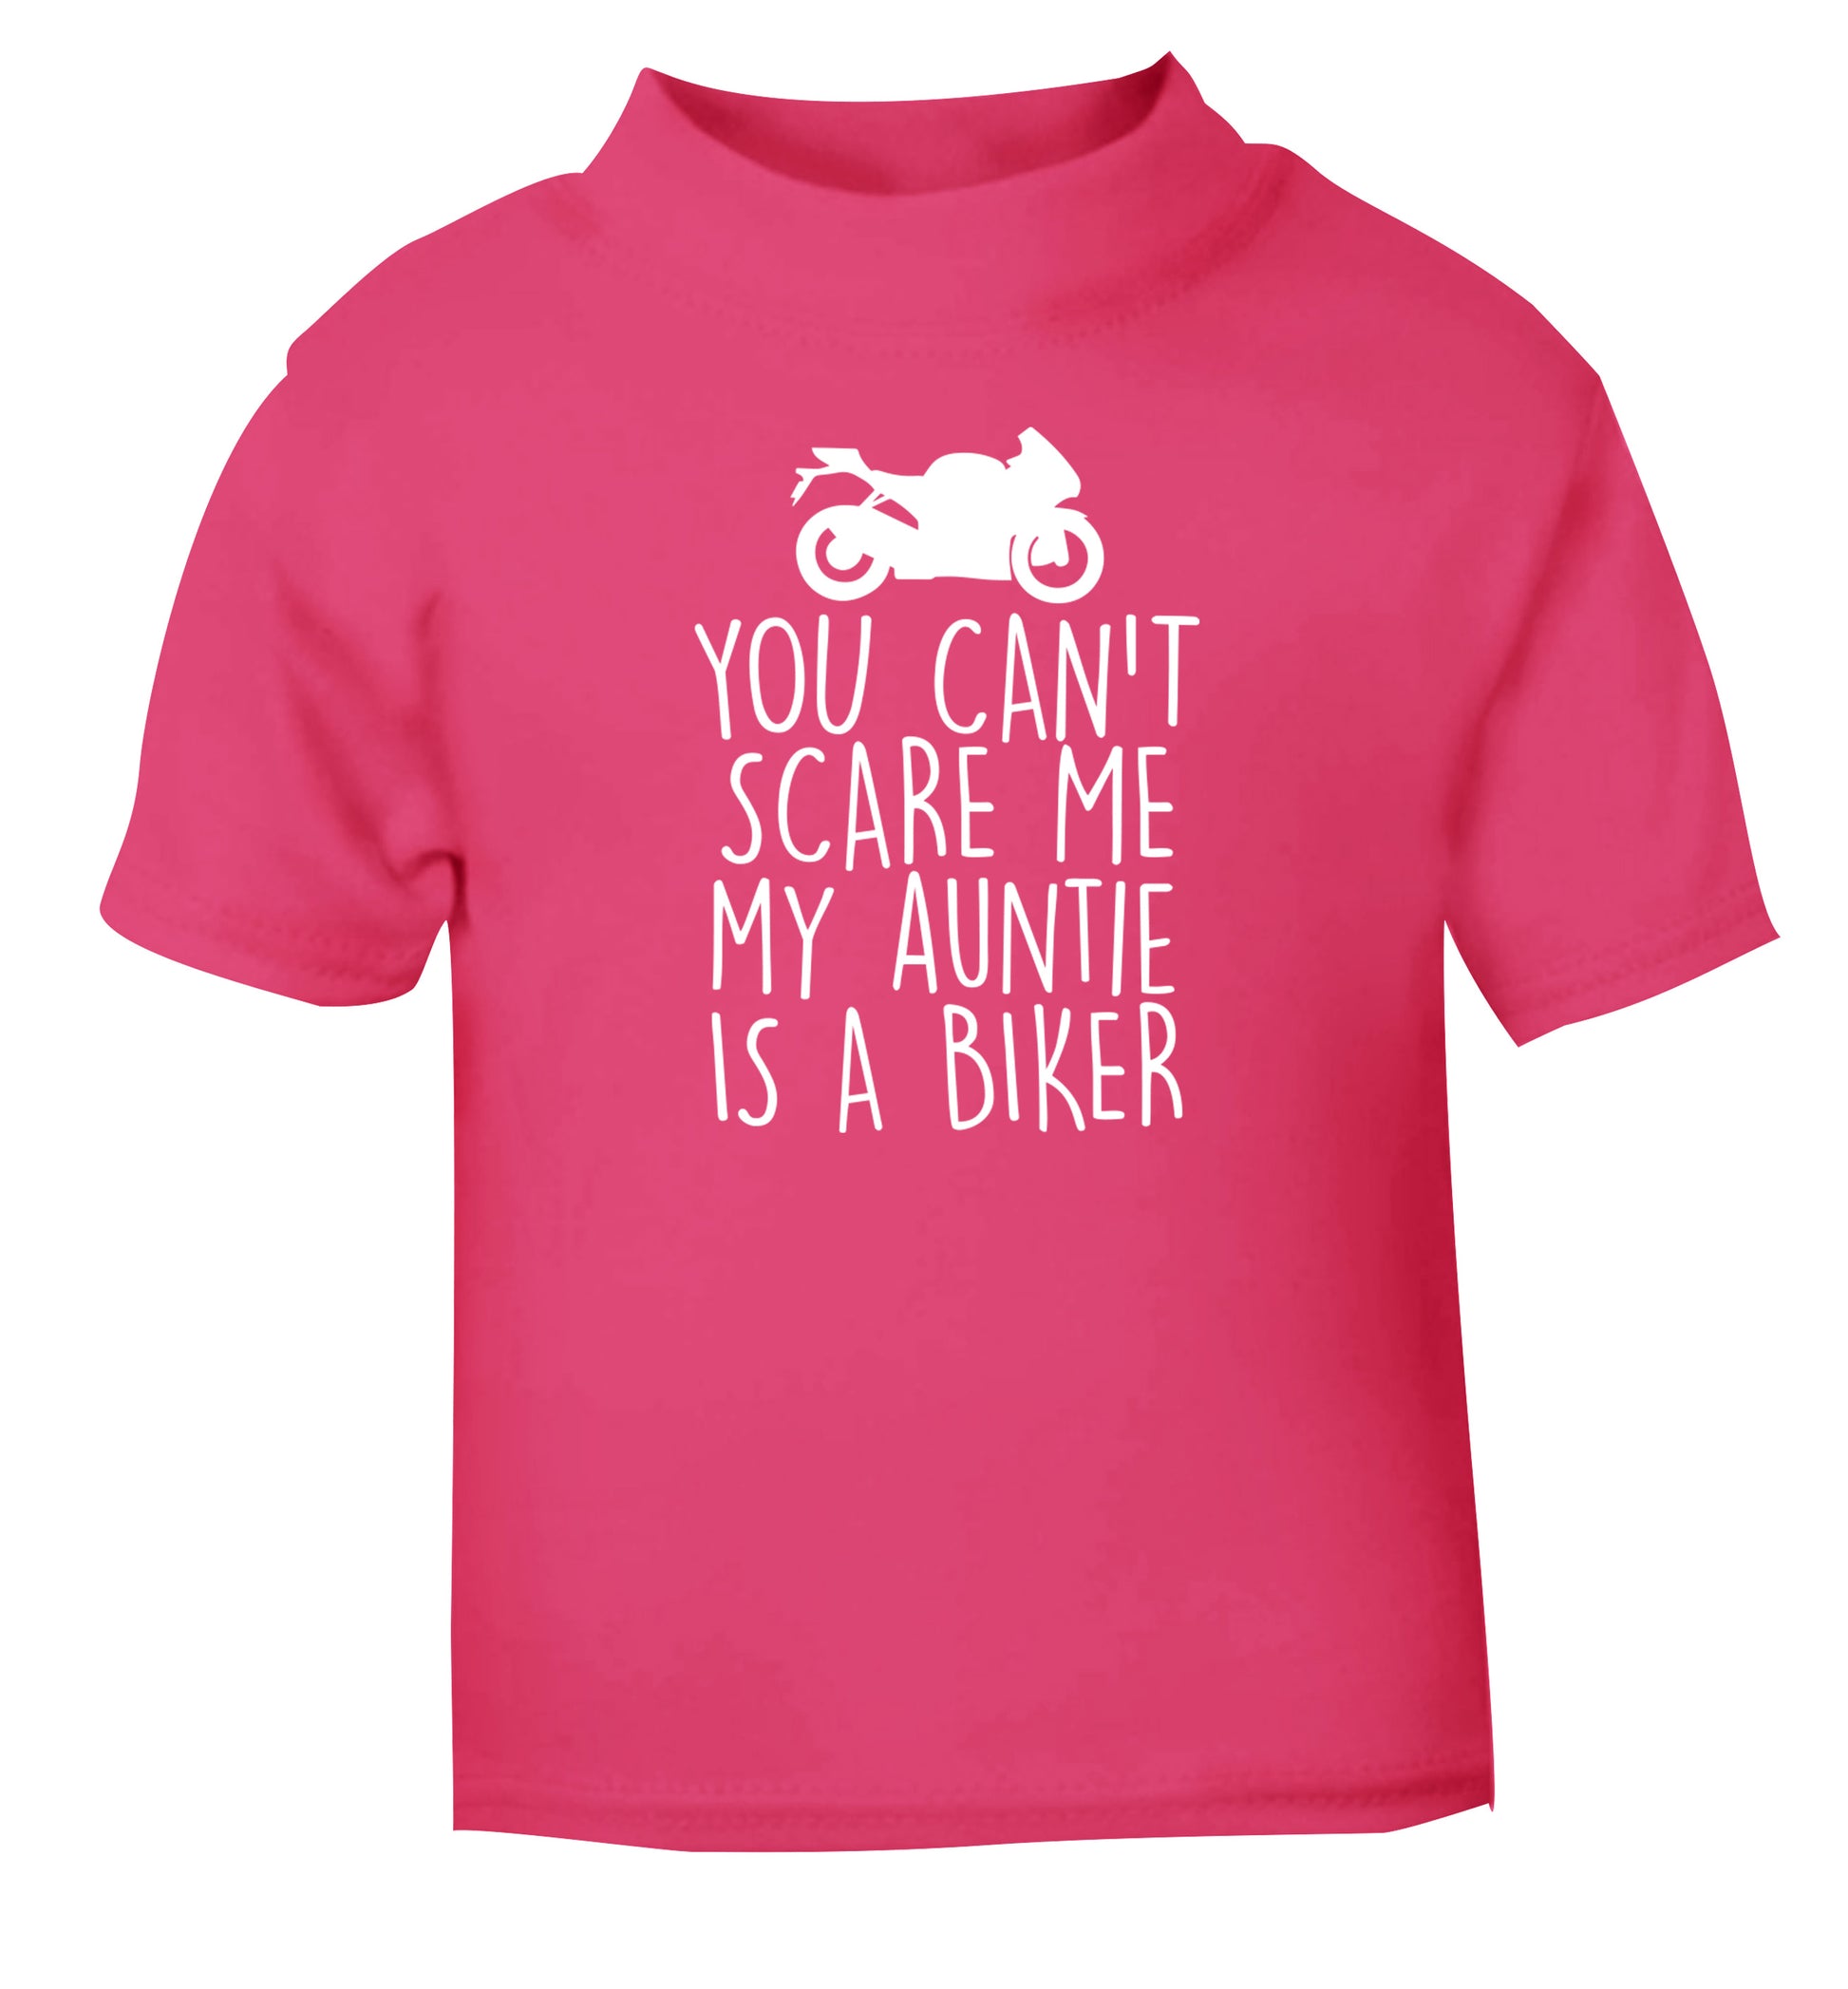 You can't scare me my auntie is a biker pink Baby Toddler Tshirt 2 Years